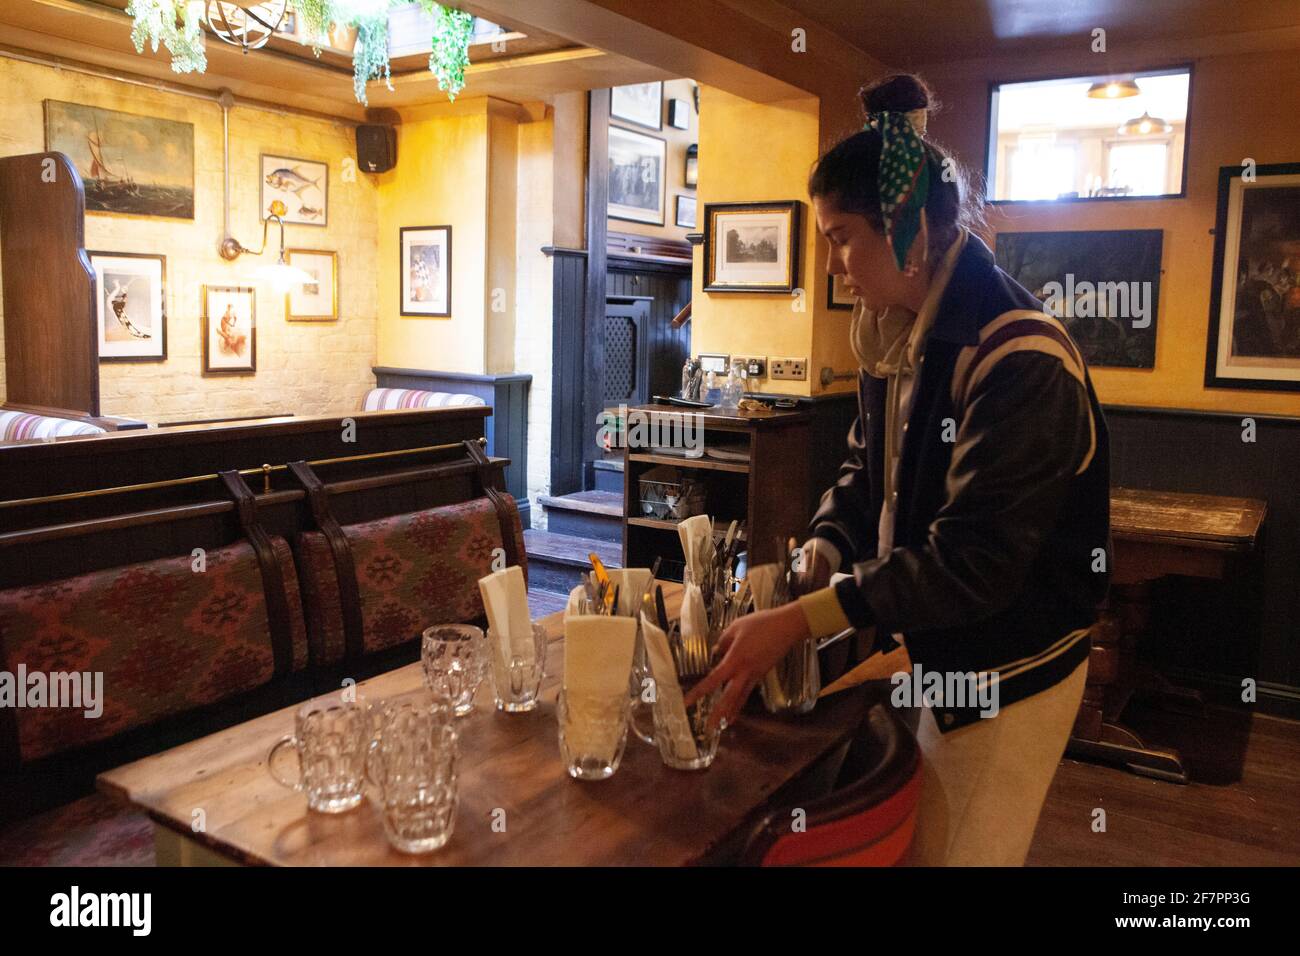 London, UK, 9 April 2021: At the Abbeville pub, in Clapham, manager Armanda polishes cutlery in preparation for re-opening from 12th April. Manager Armanda polishes cutlery. Customers will be served drinks and food on the outdoor terrace and tables on the pavement. Anna Watson/Alamy Live News Stock Photo